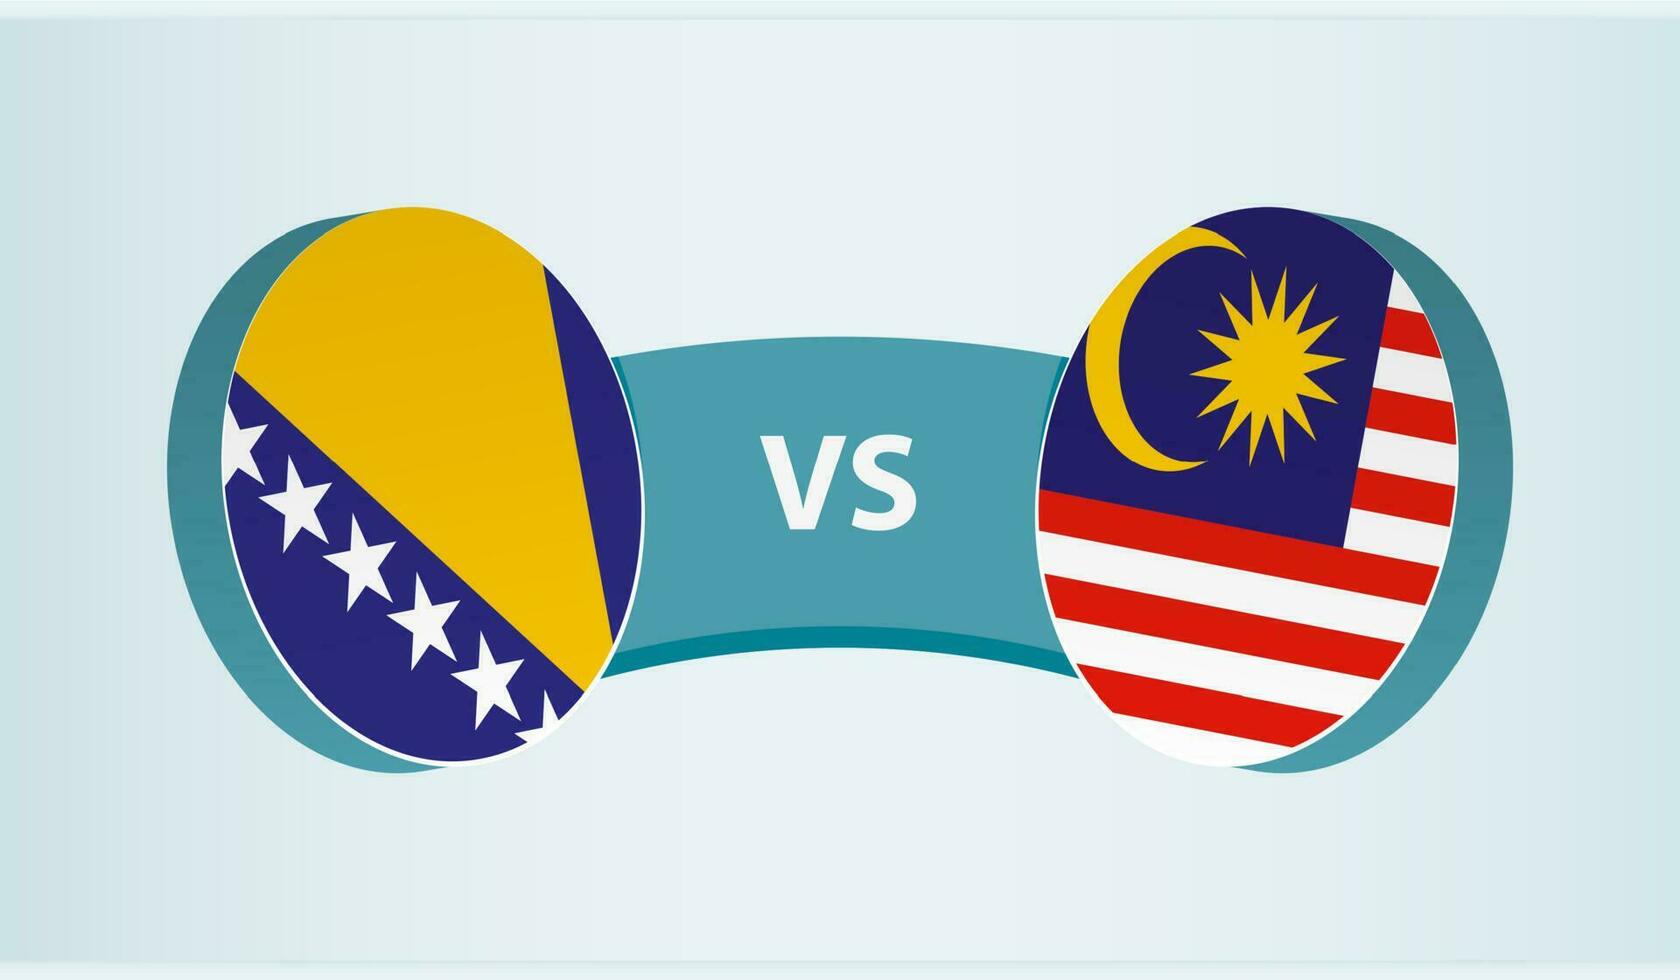 Bosnia and Herzegovina versus Malaysia, team sports competition concept. vector